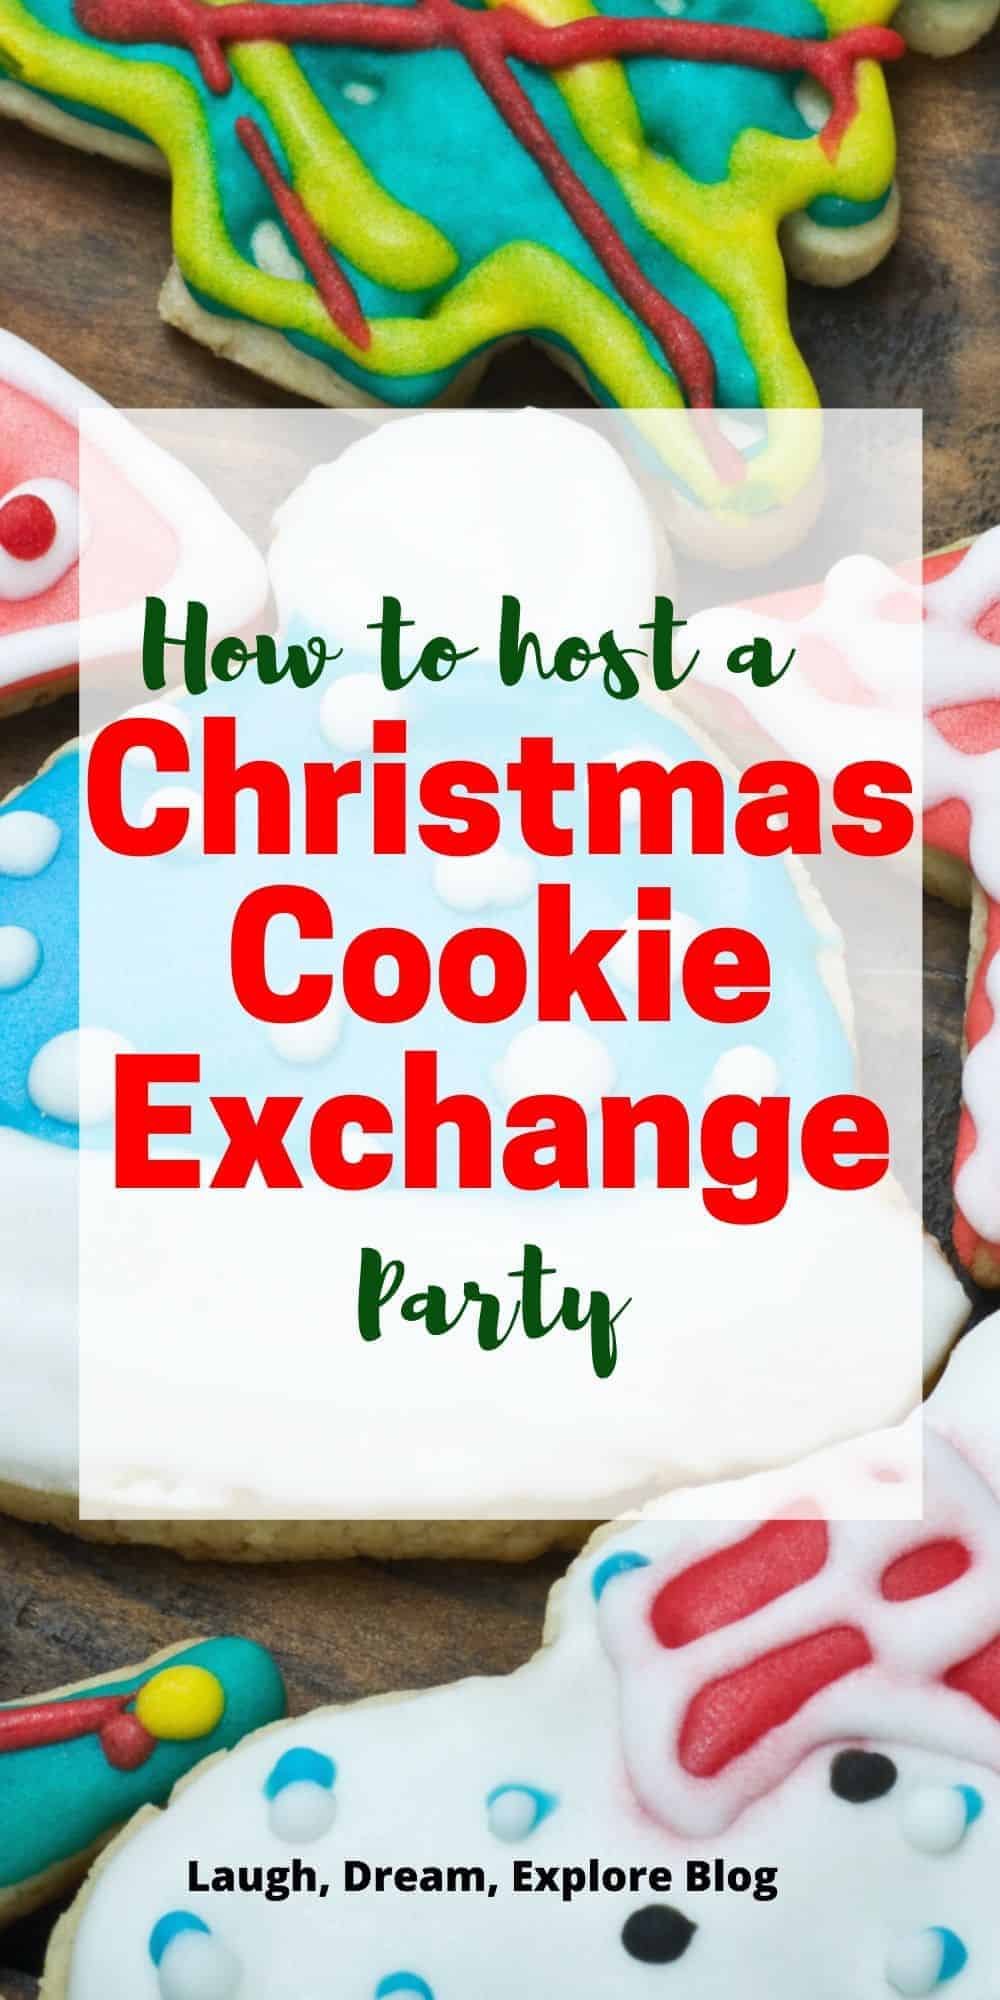 How to host a cookie exchange party